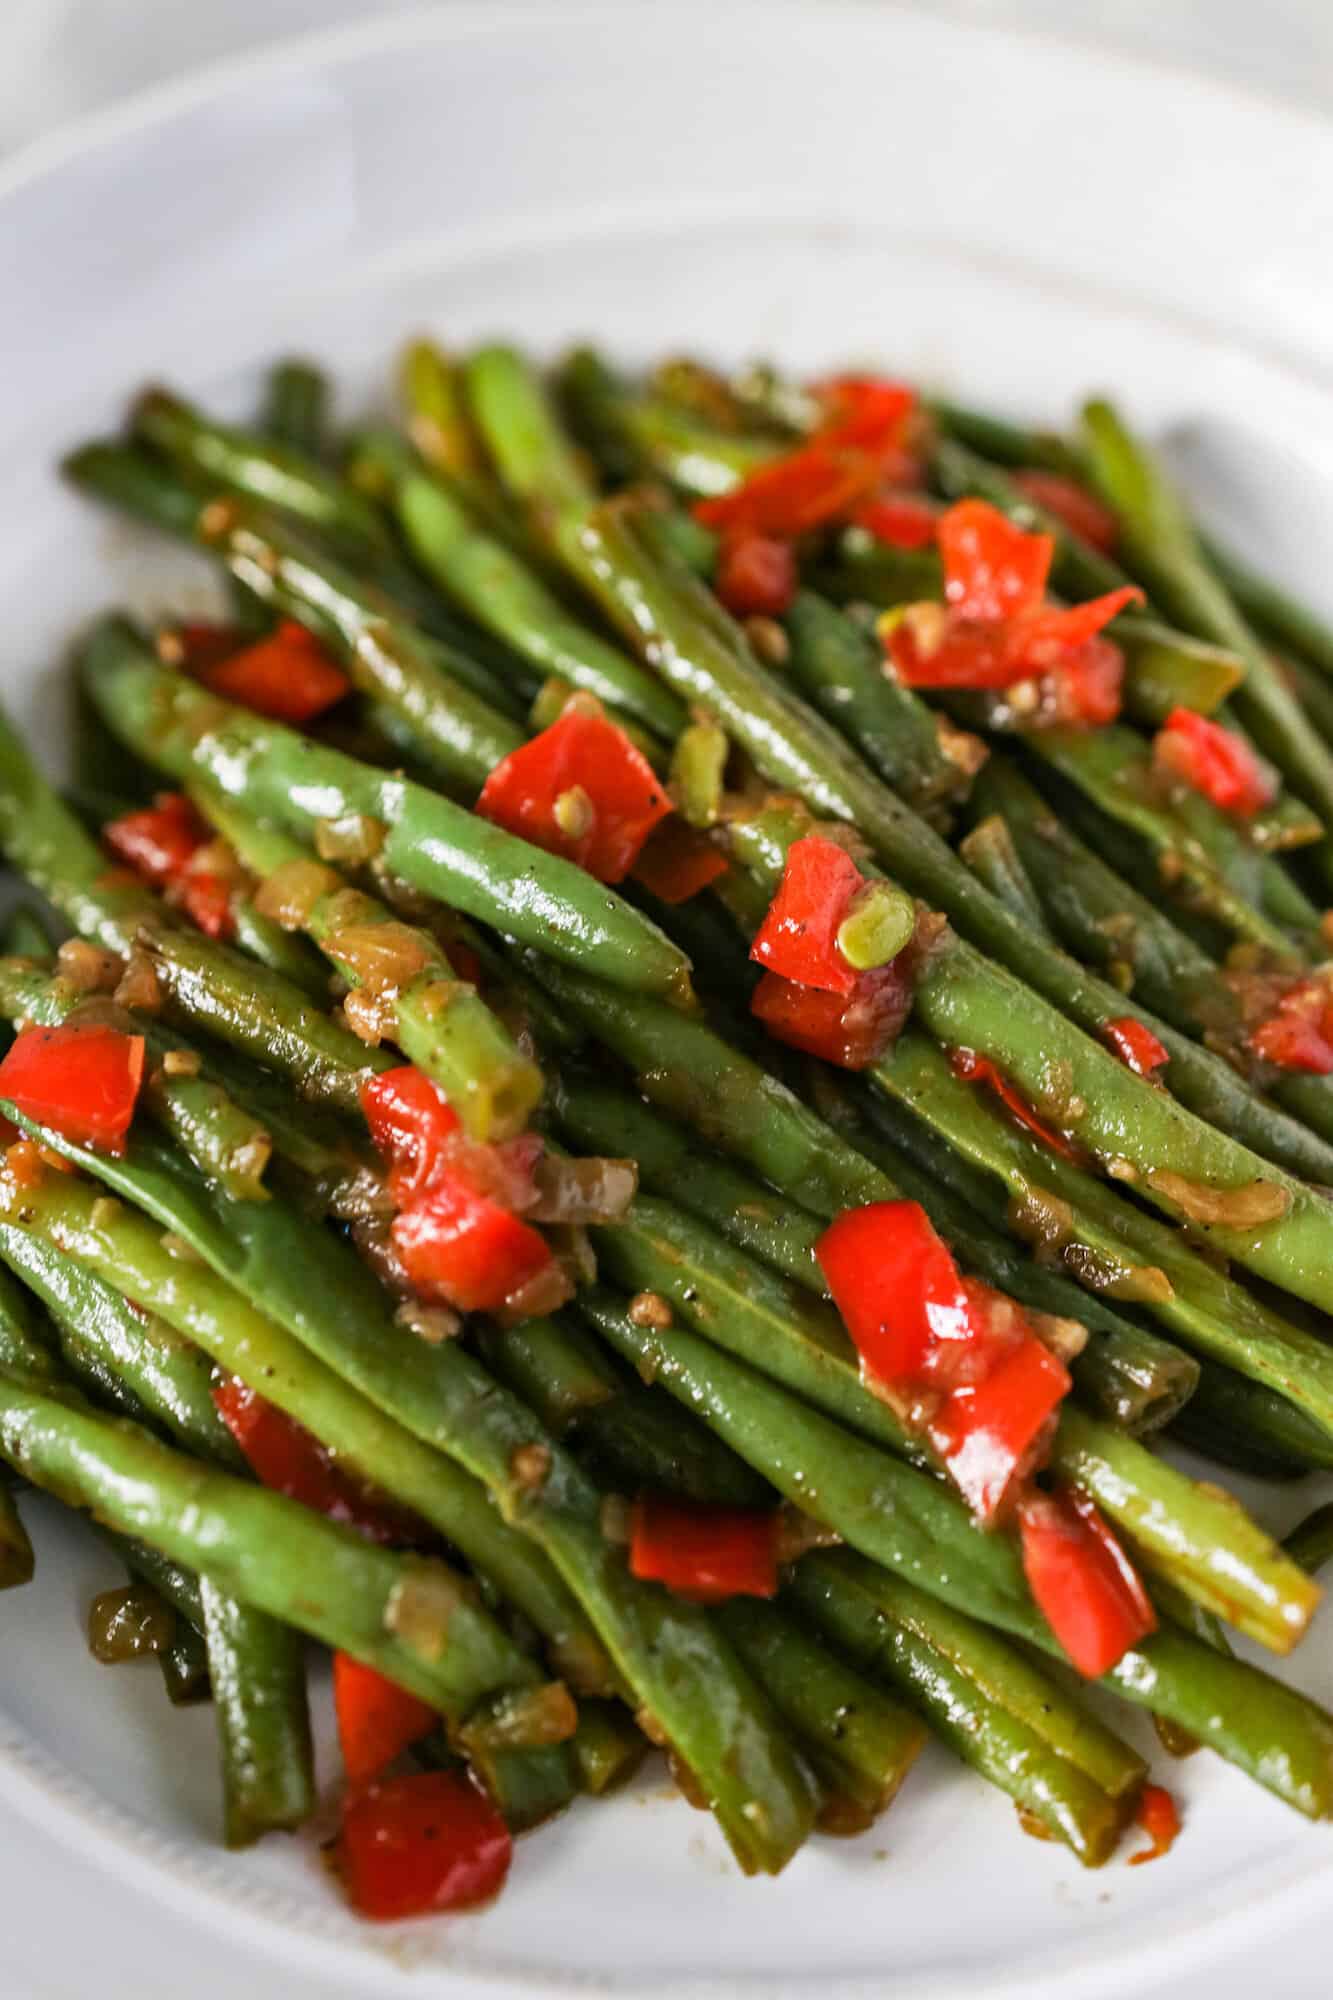 Skillet sauteed green beans